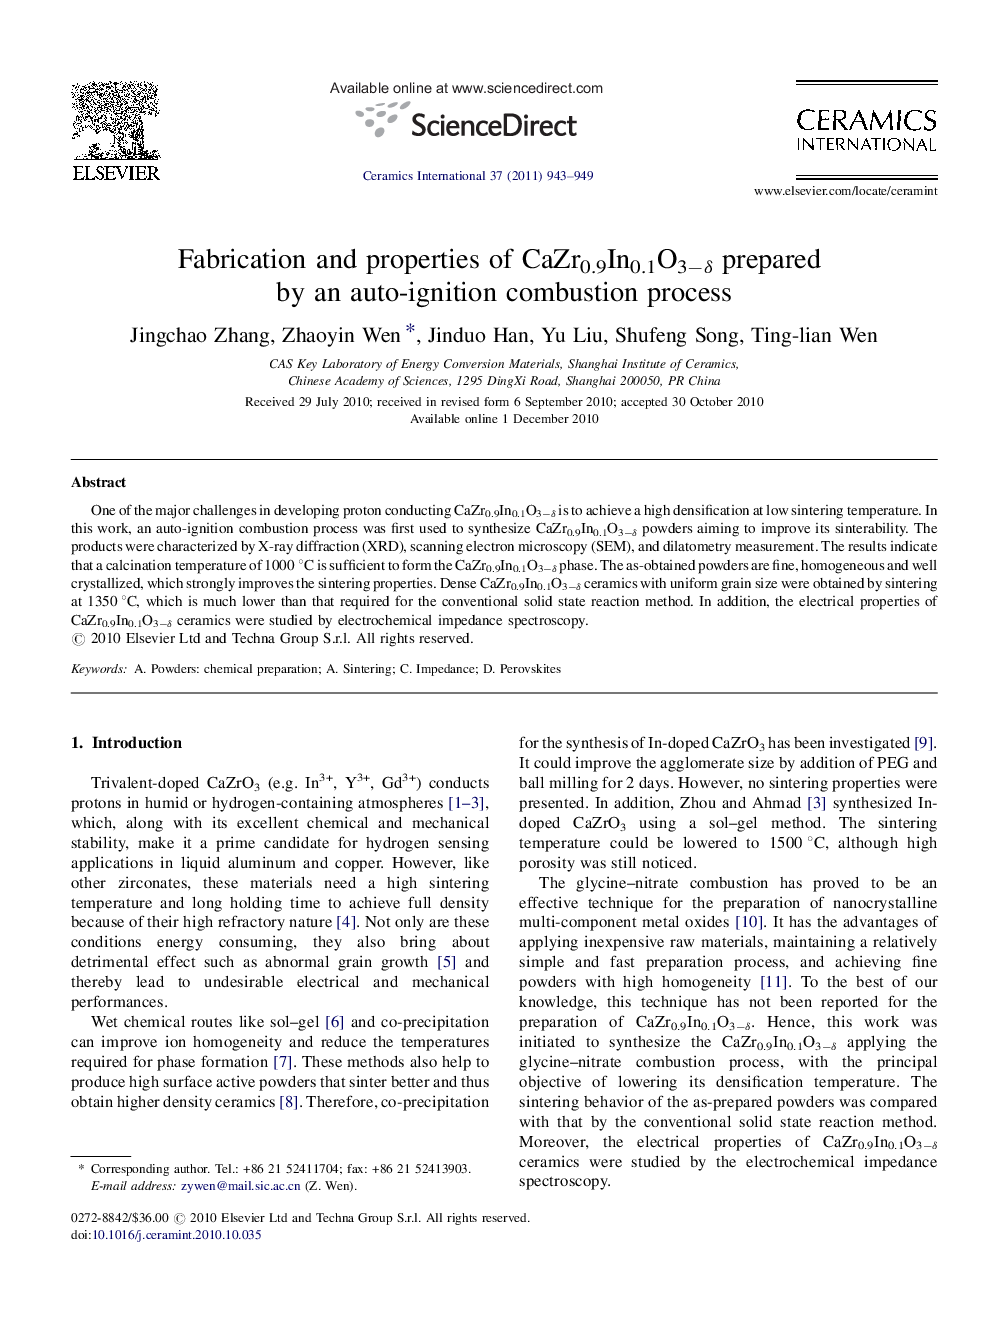 Fabrication and properties of CaZr0.9In0.1O3âÎ´ prepared by an auto-ignition combustion process